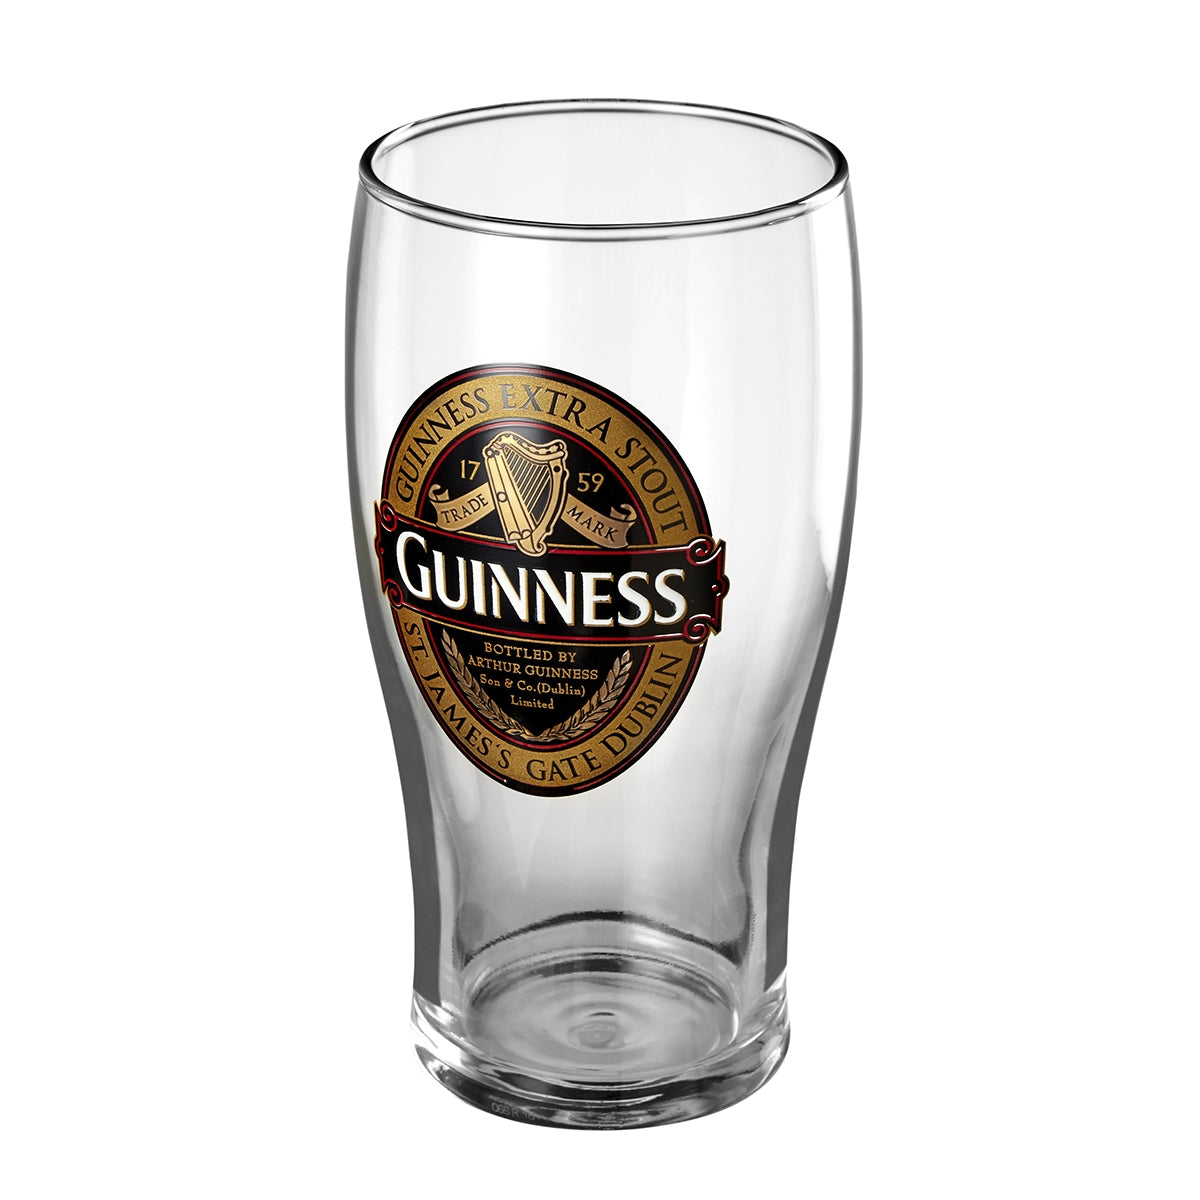 Limited edition Guinness UK Classic Collection Pint Glass - 4 Pack featuring the branded Extra Stout label.